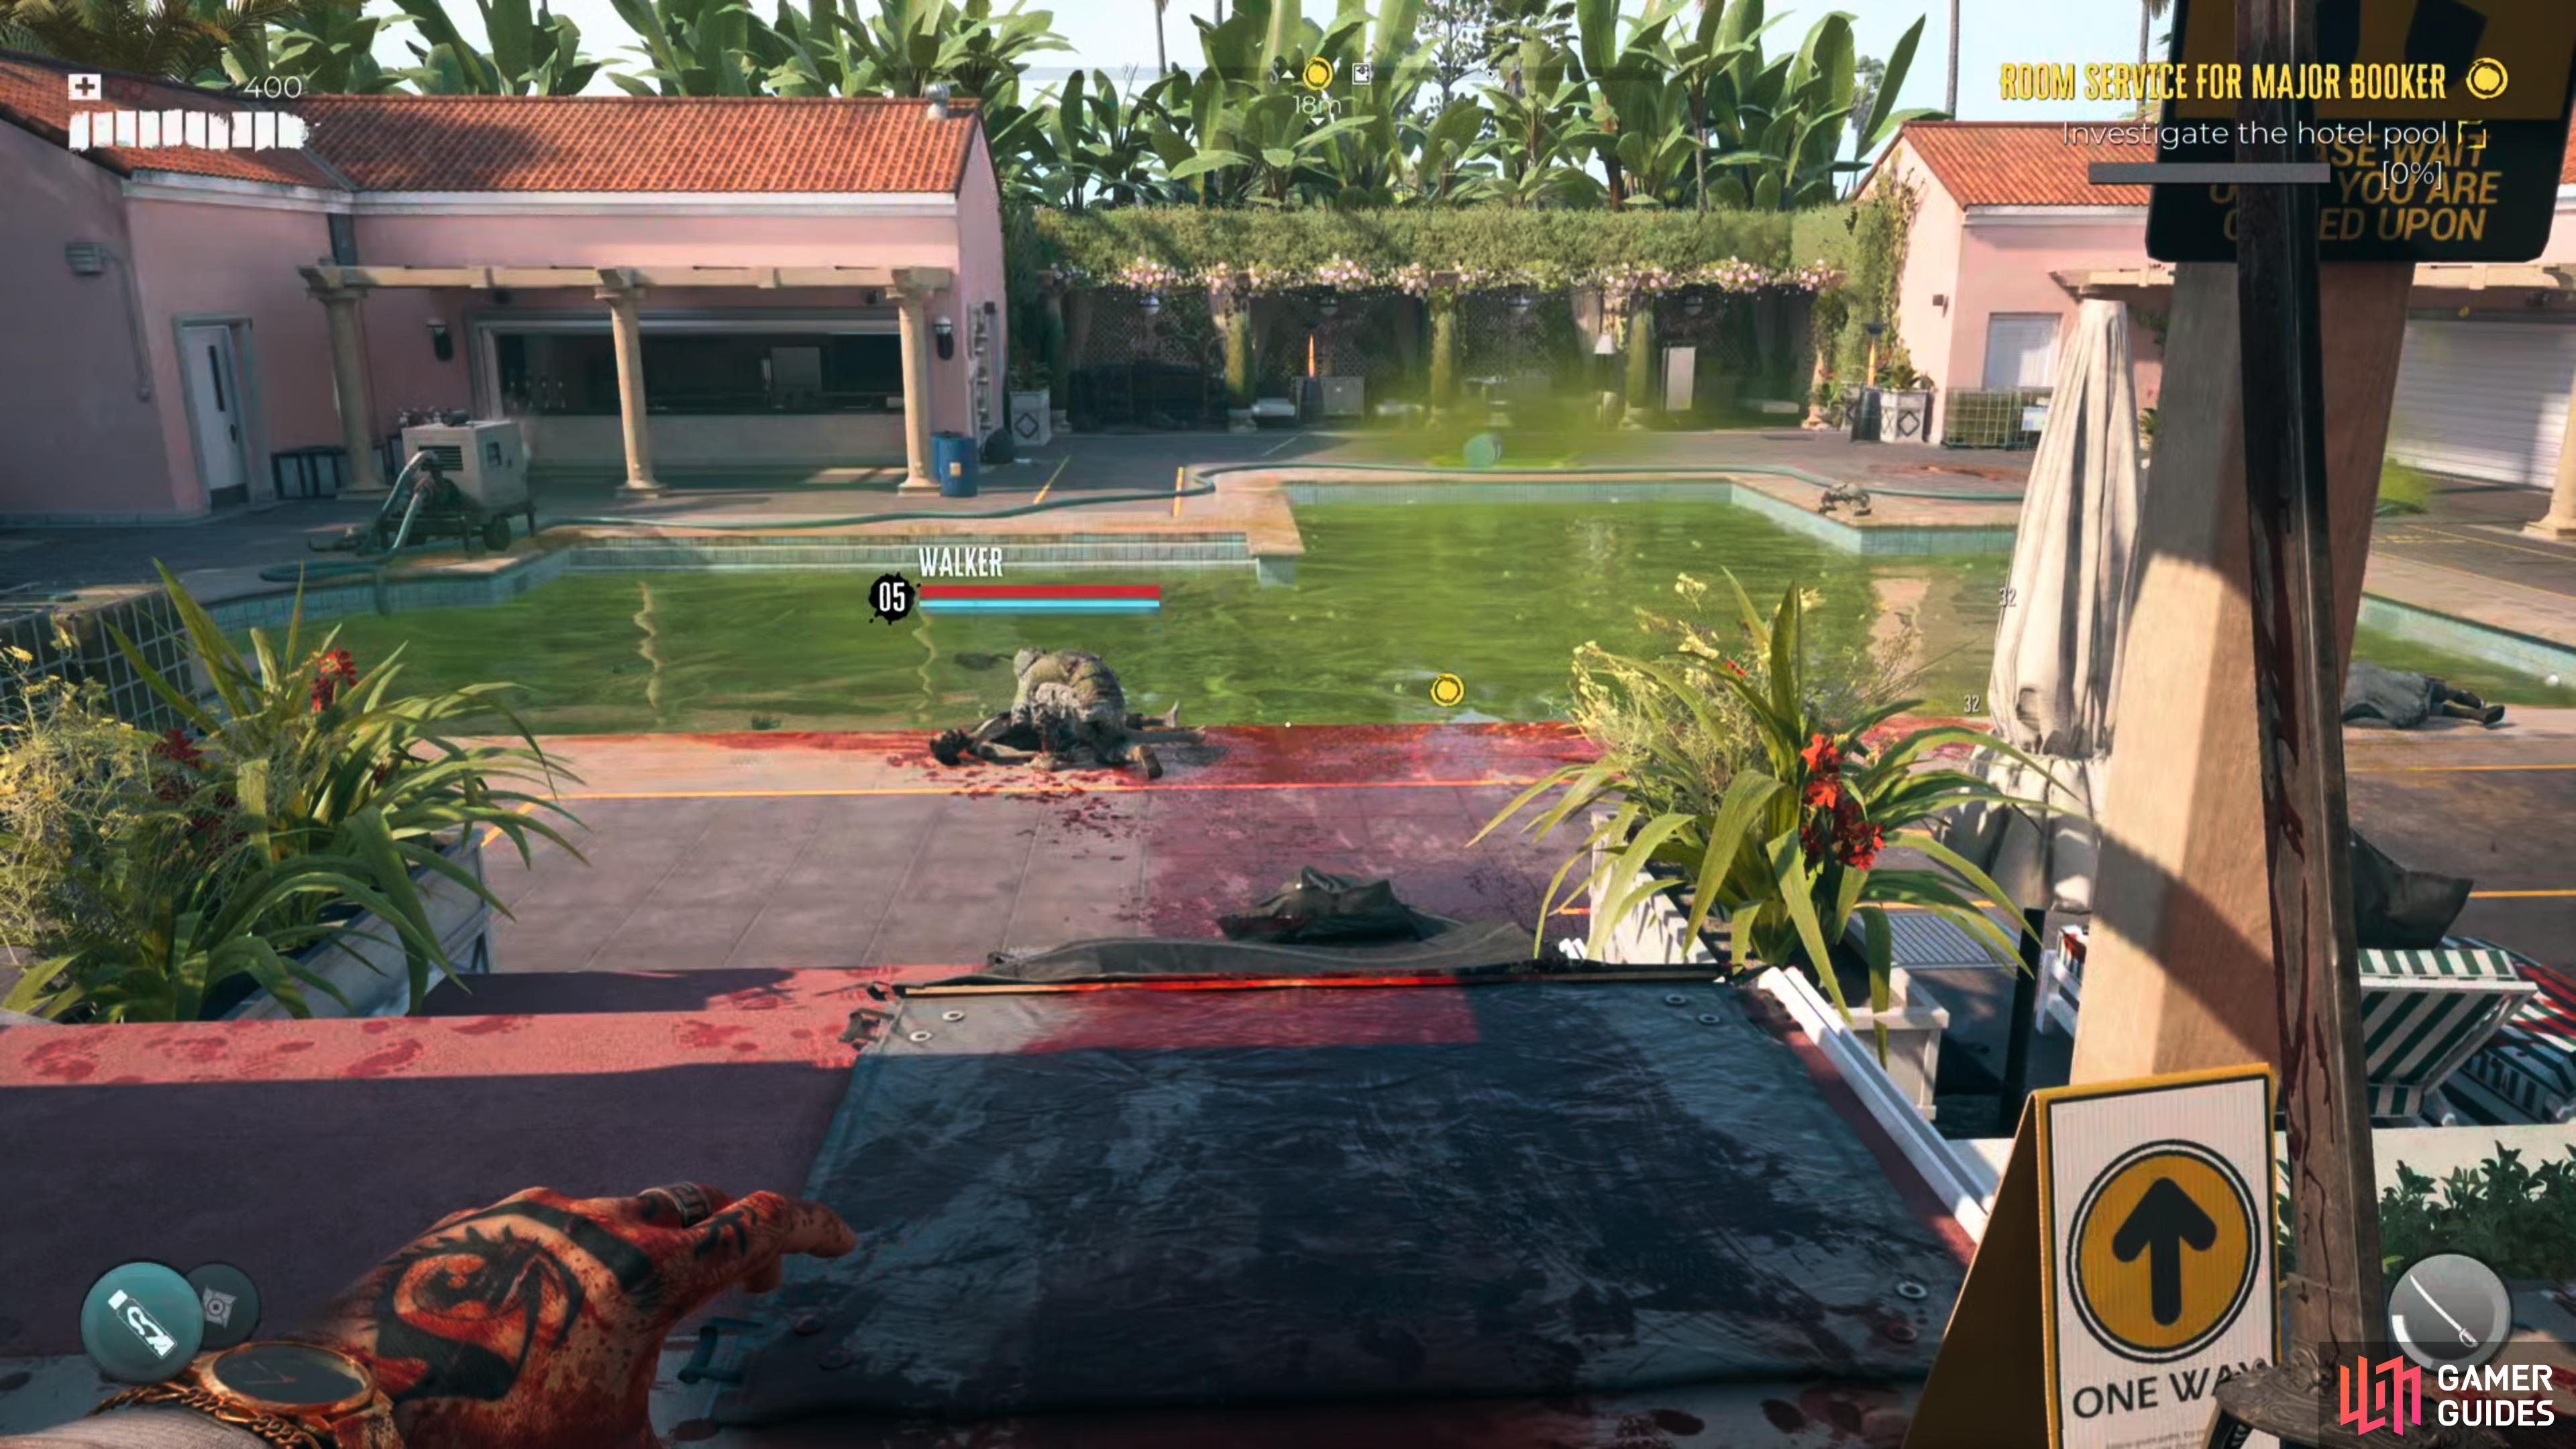 The acidic pool at Harlpen Hotel in Dead Island 2.